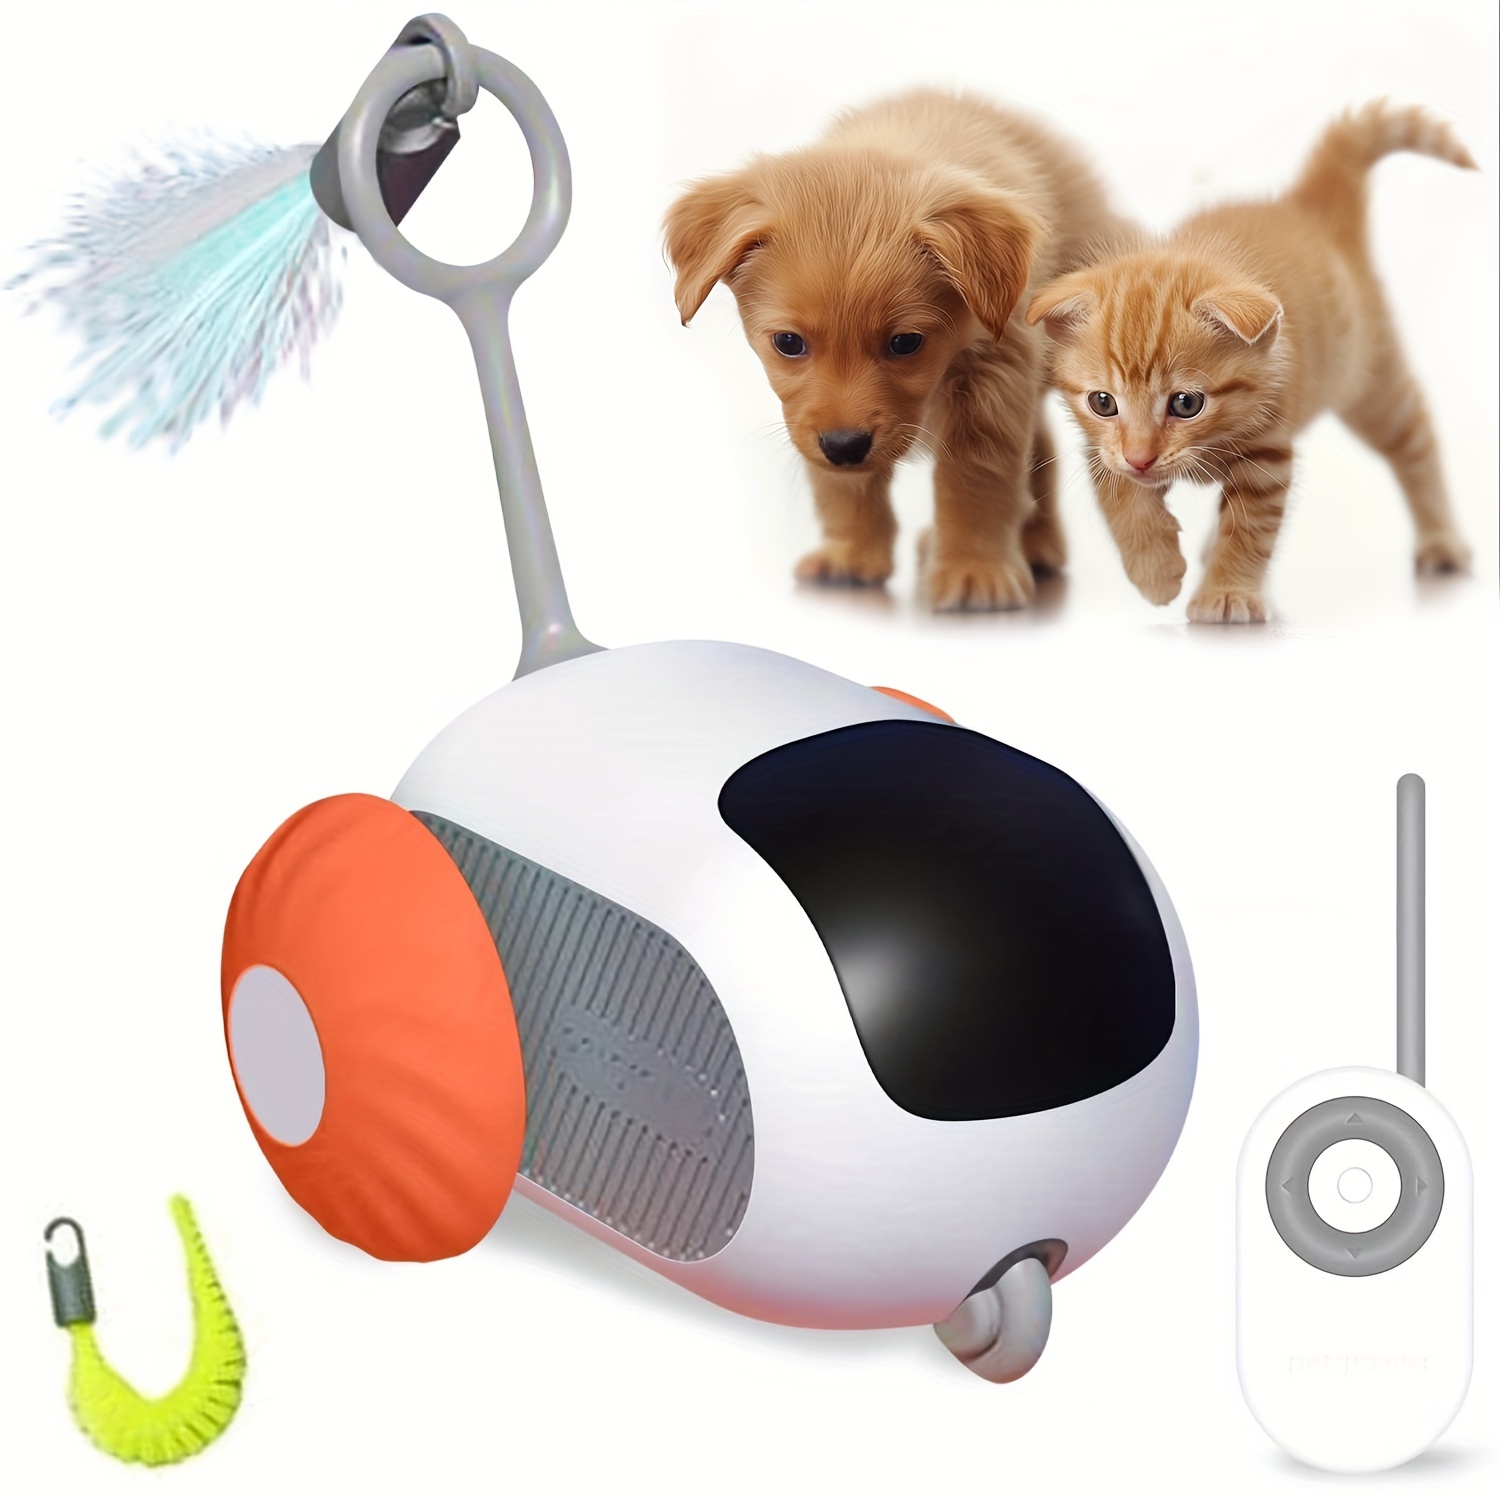 

Interactive Cat Toys, Remote Control Cat Toy Usb Rechargeable Automatic Cat Toys With Obstacle Avoidance Intelligent Remote Control Dual Mode Smart Electric Cat Toy